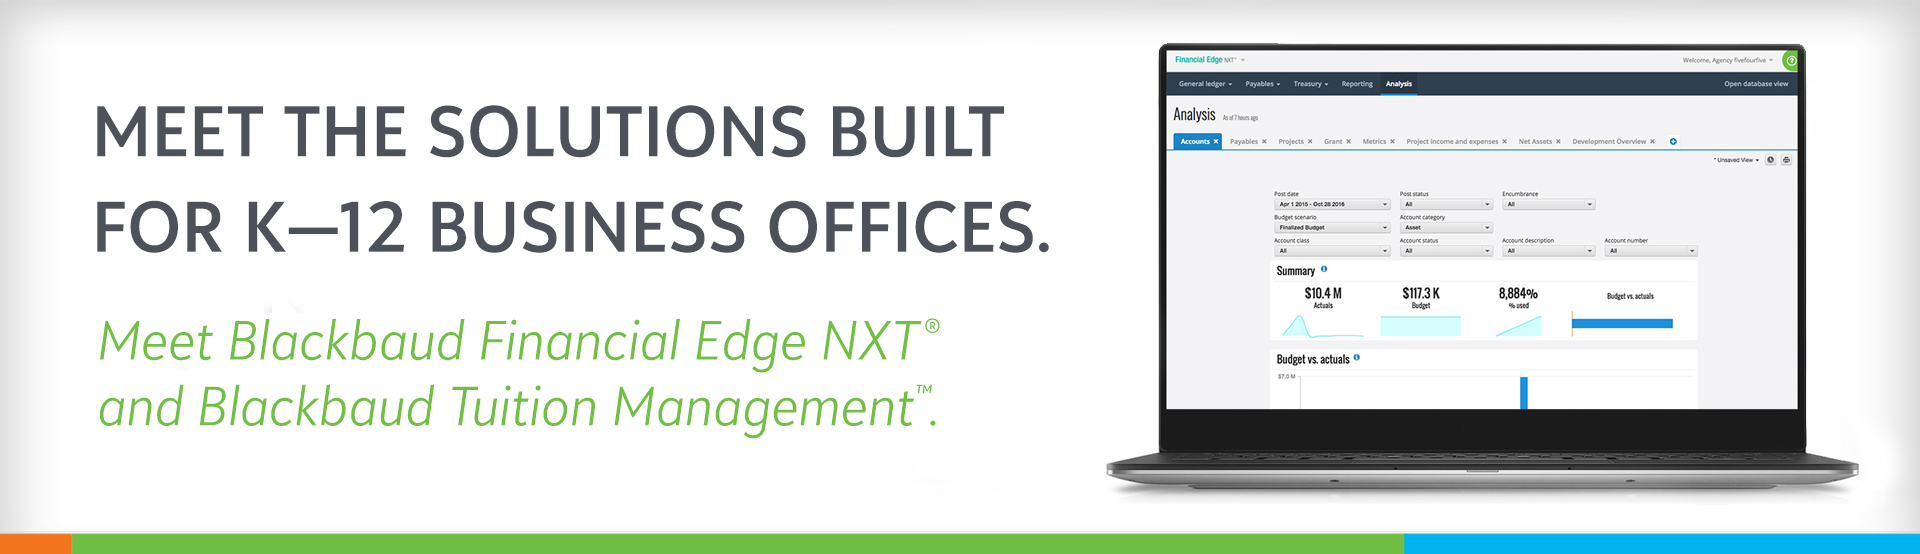 Meet the solutions built for K-12 business offices. Meet Blackbaud Financial Edge NXT and Blackbaud Tuition Management.